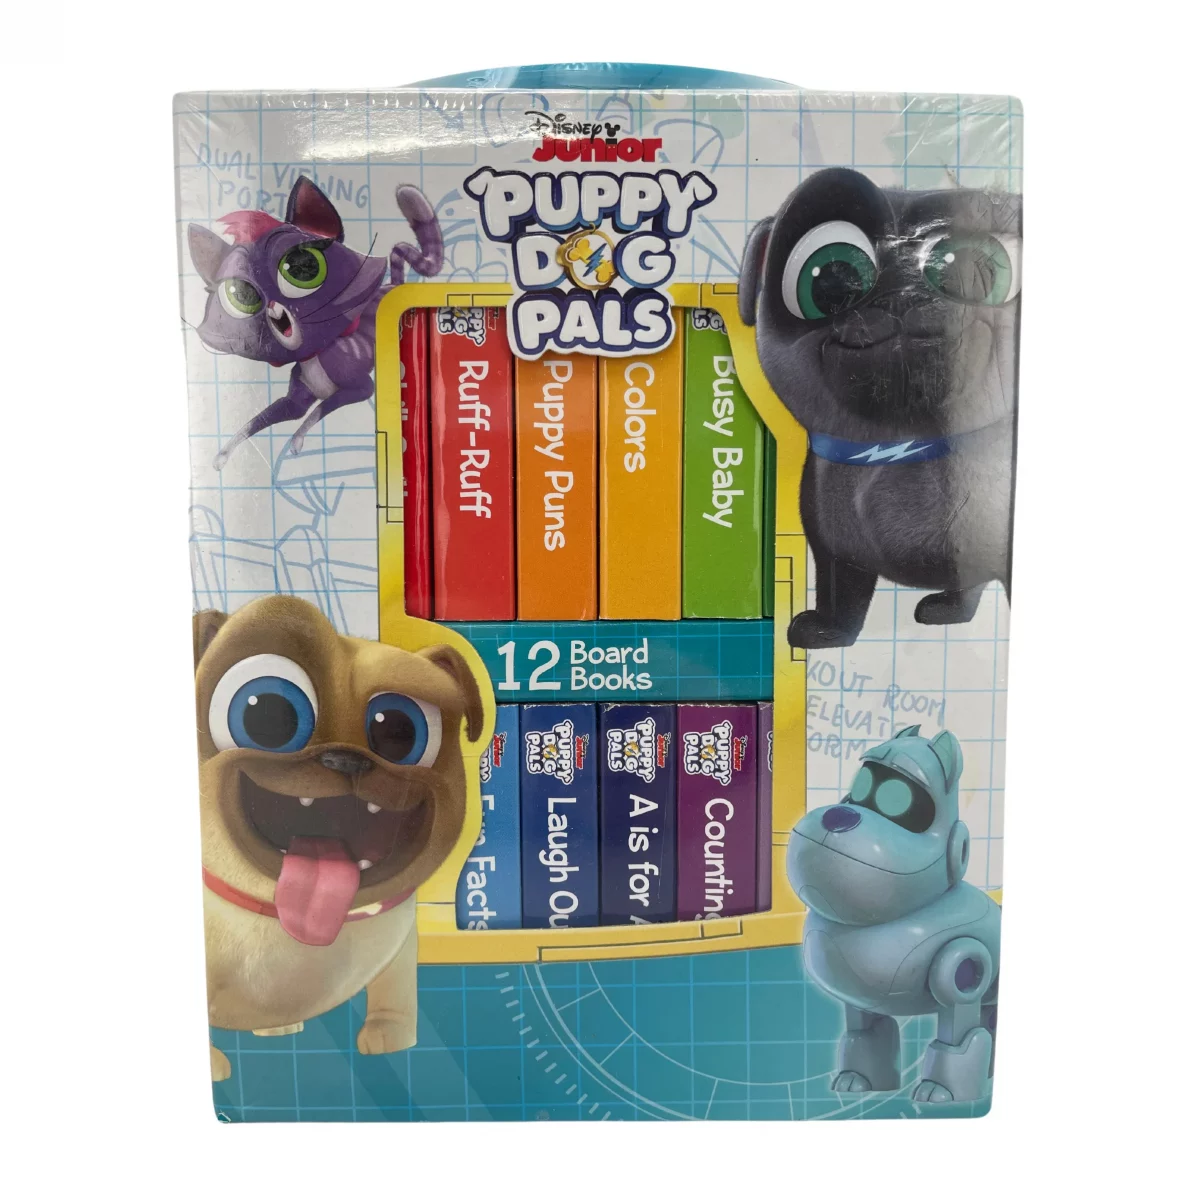 Disney Junior Puppy Dog Pals Books / 12 Board Books / Early Learning Books